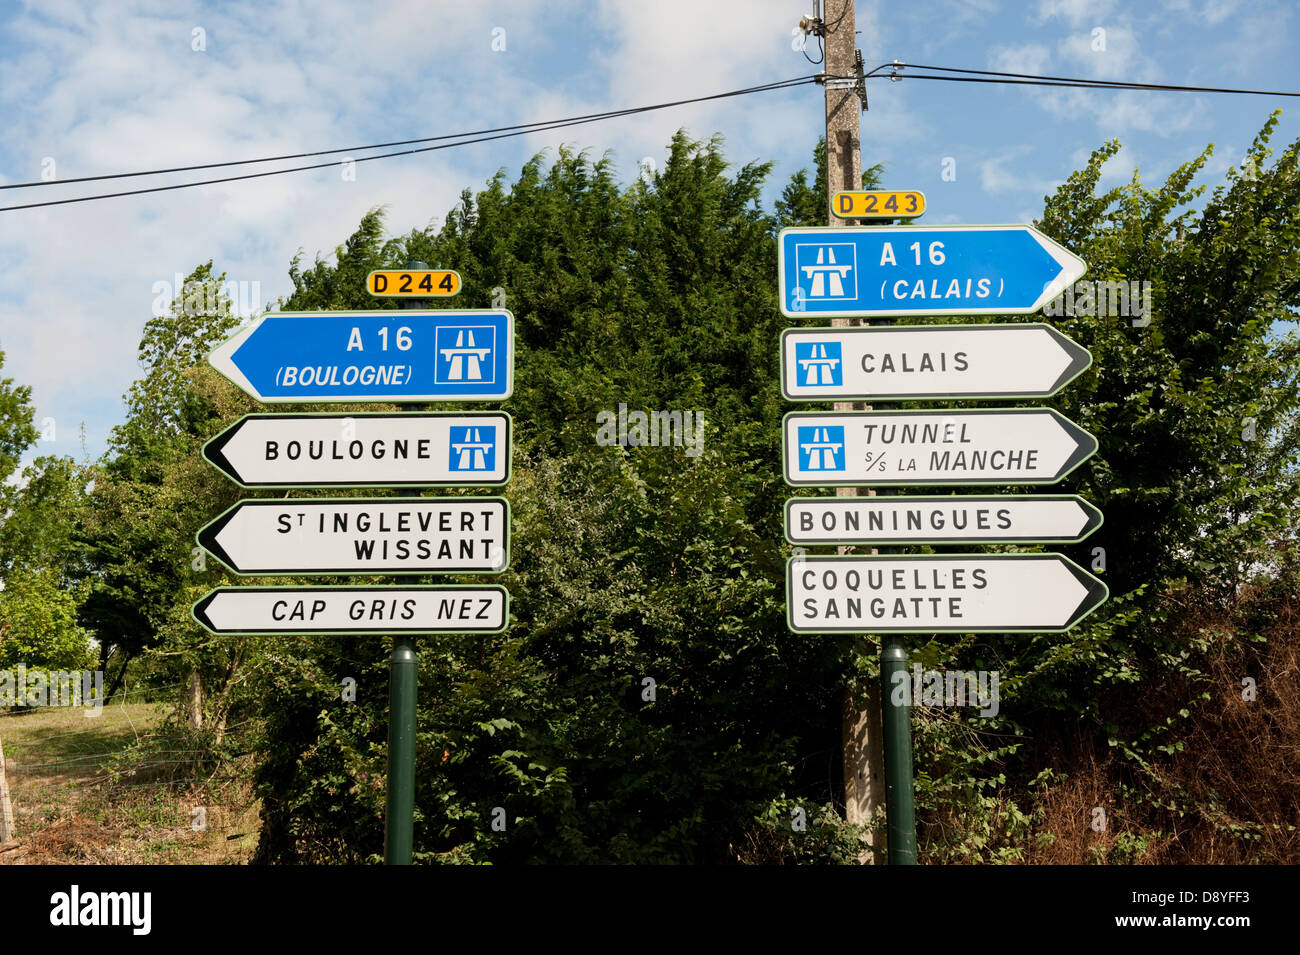 Road Sign A16 Calais Boulogne Wissant France Europe Stock Photo